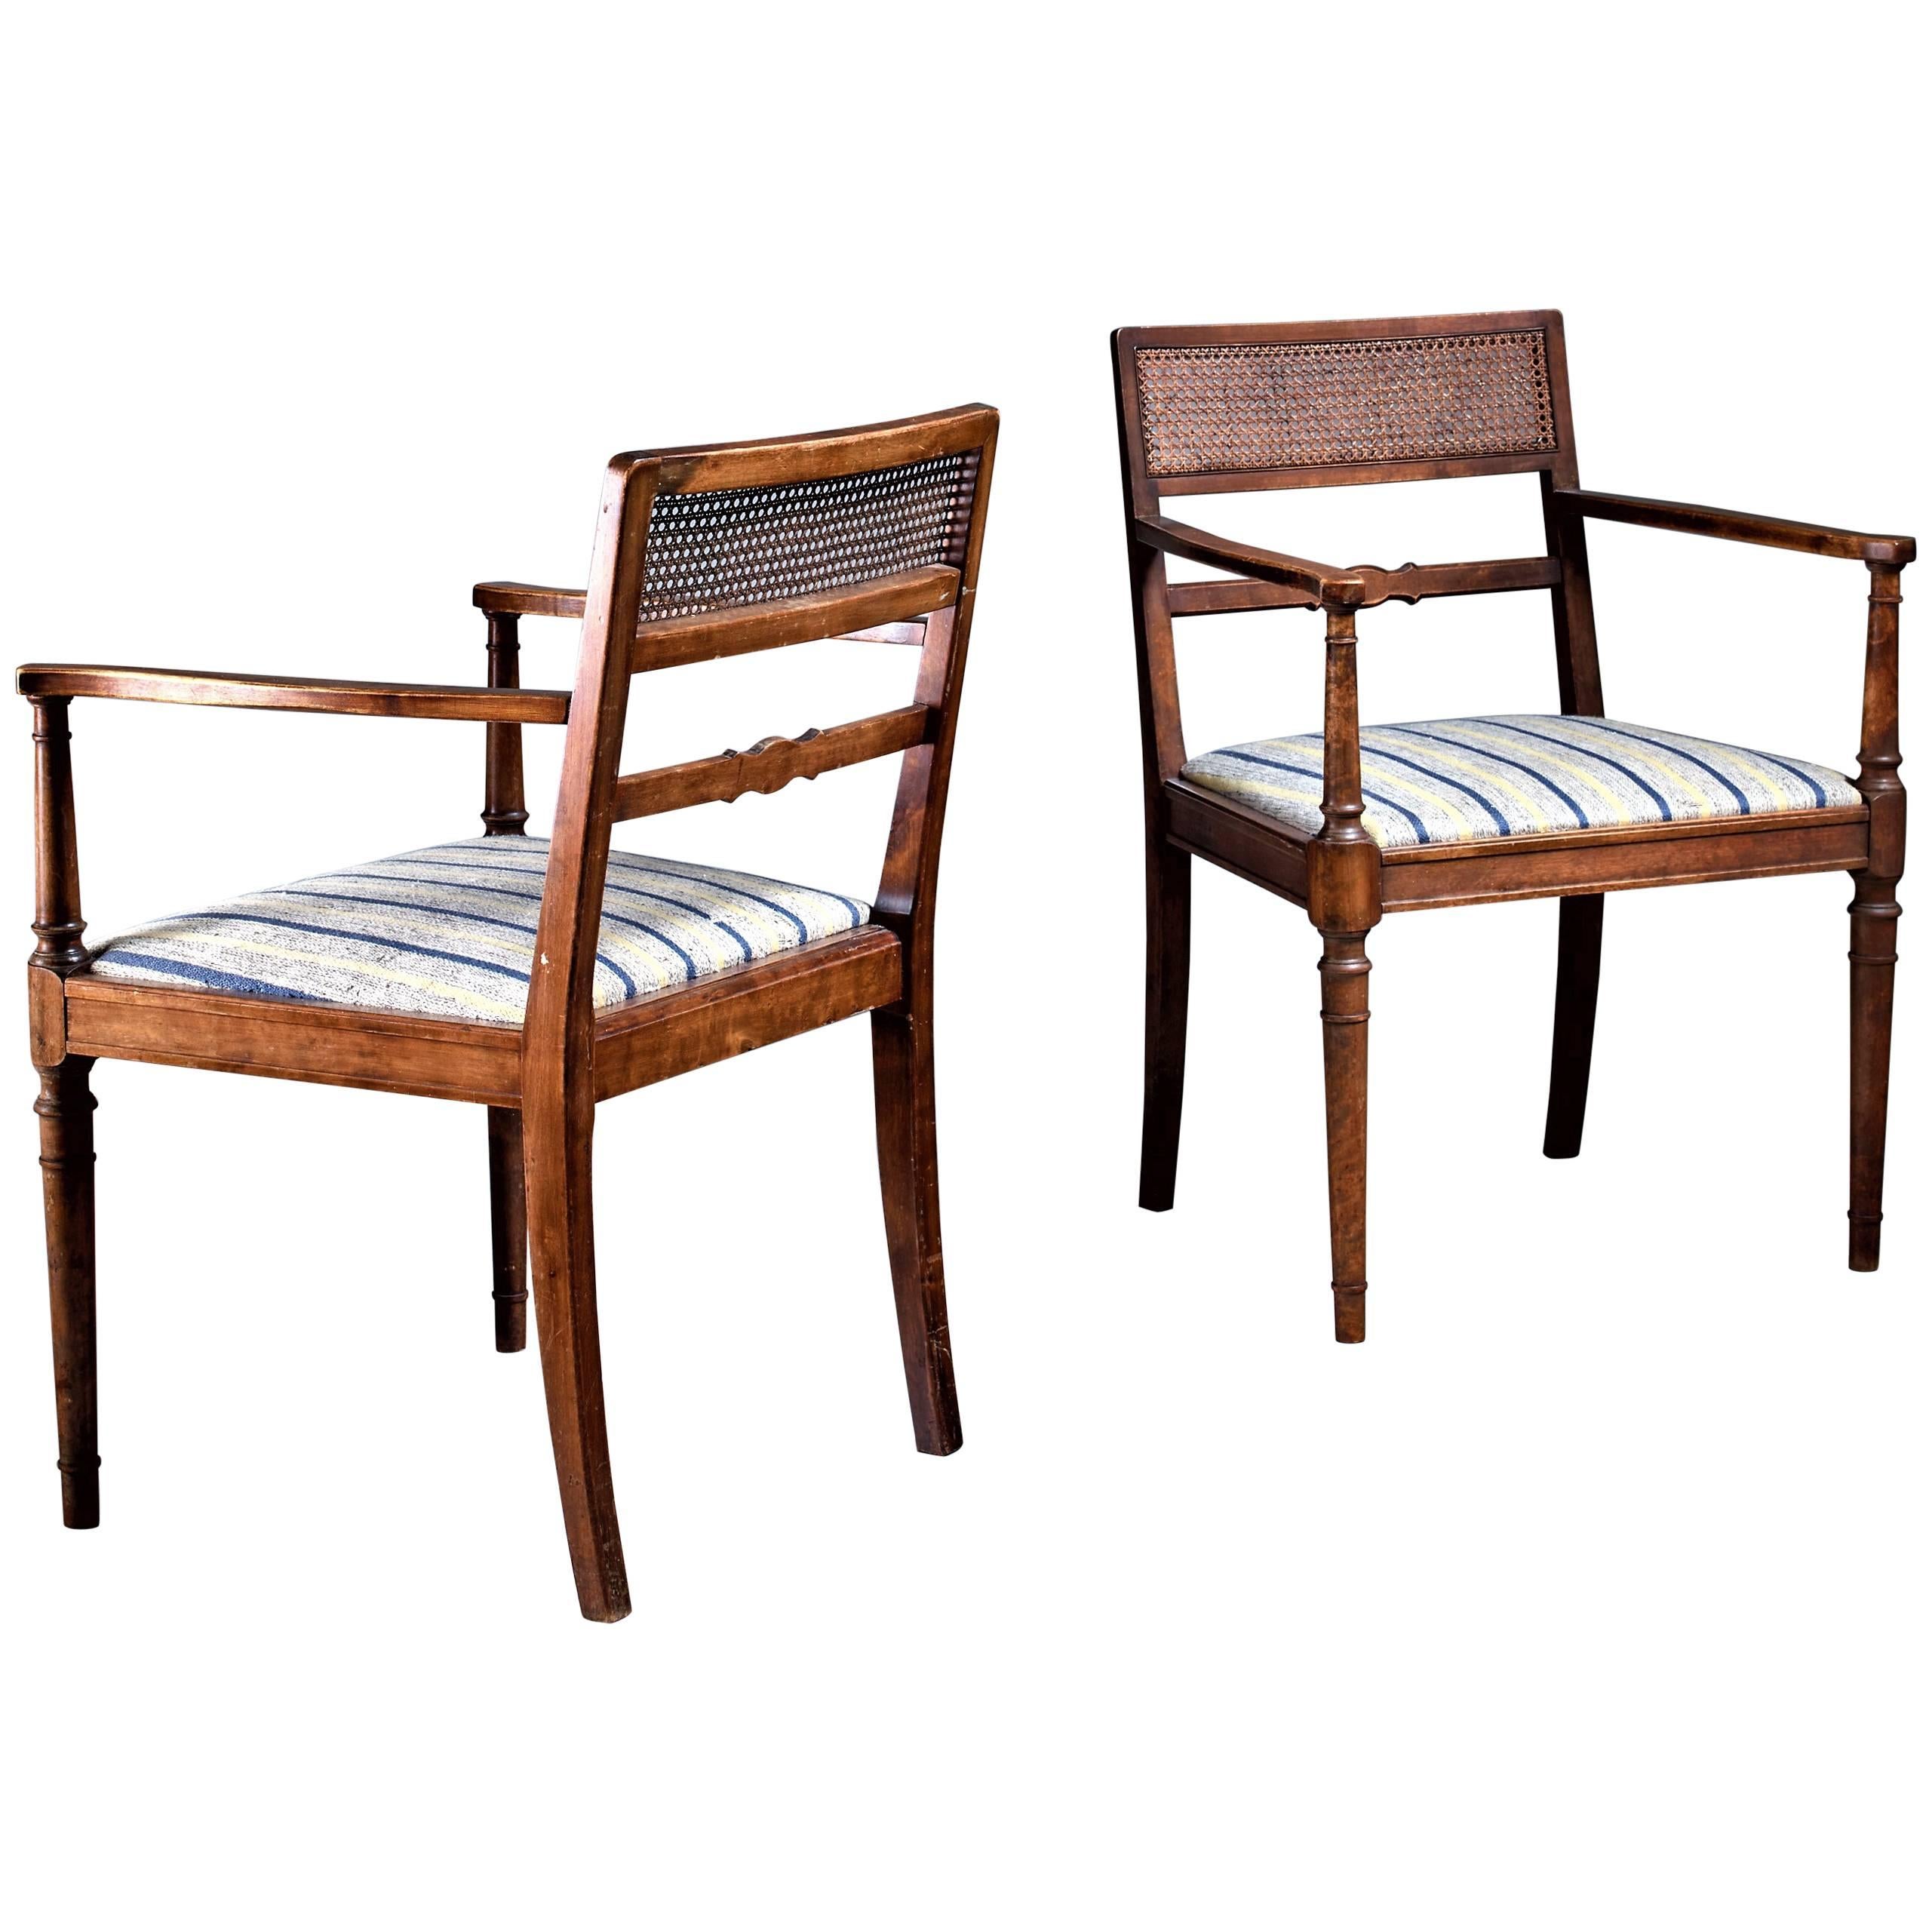 Axel Einar Hjorth Pair of Armchairs for SMF, Bodafors, Sweden, 1920s